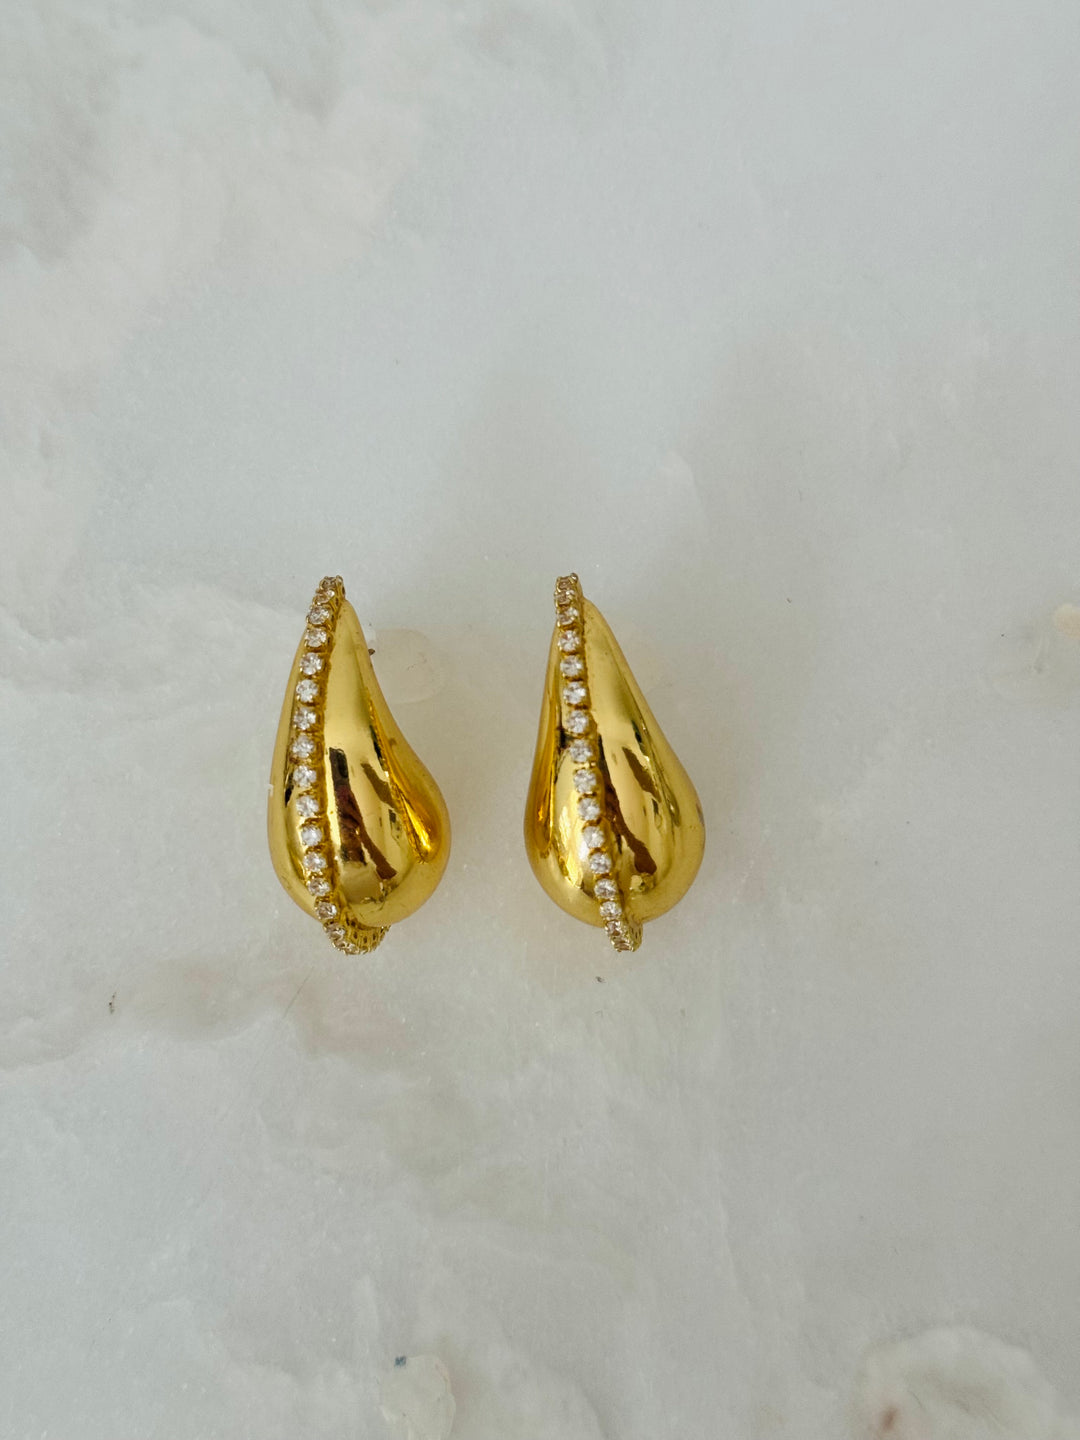 Sparkling Gold Drop Earrings with Zirconia